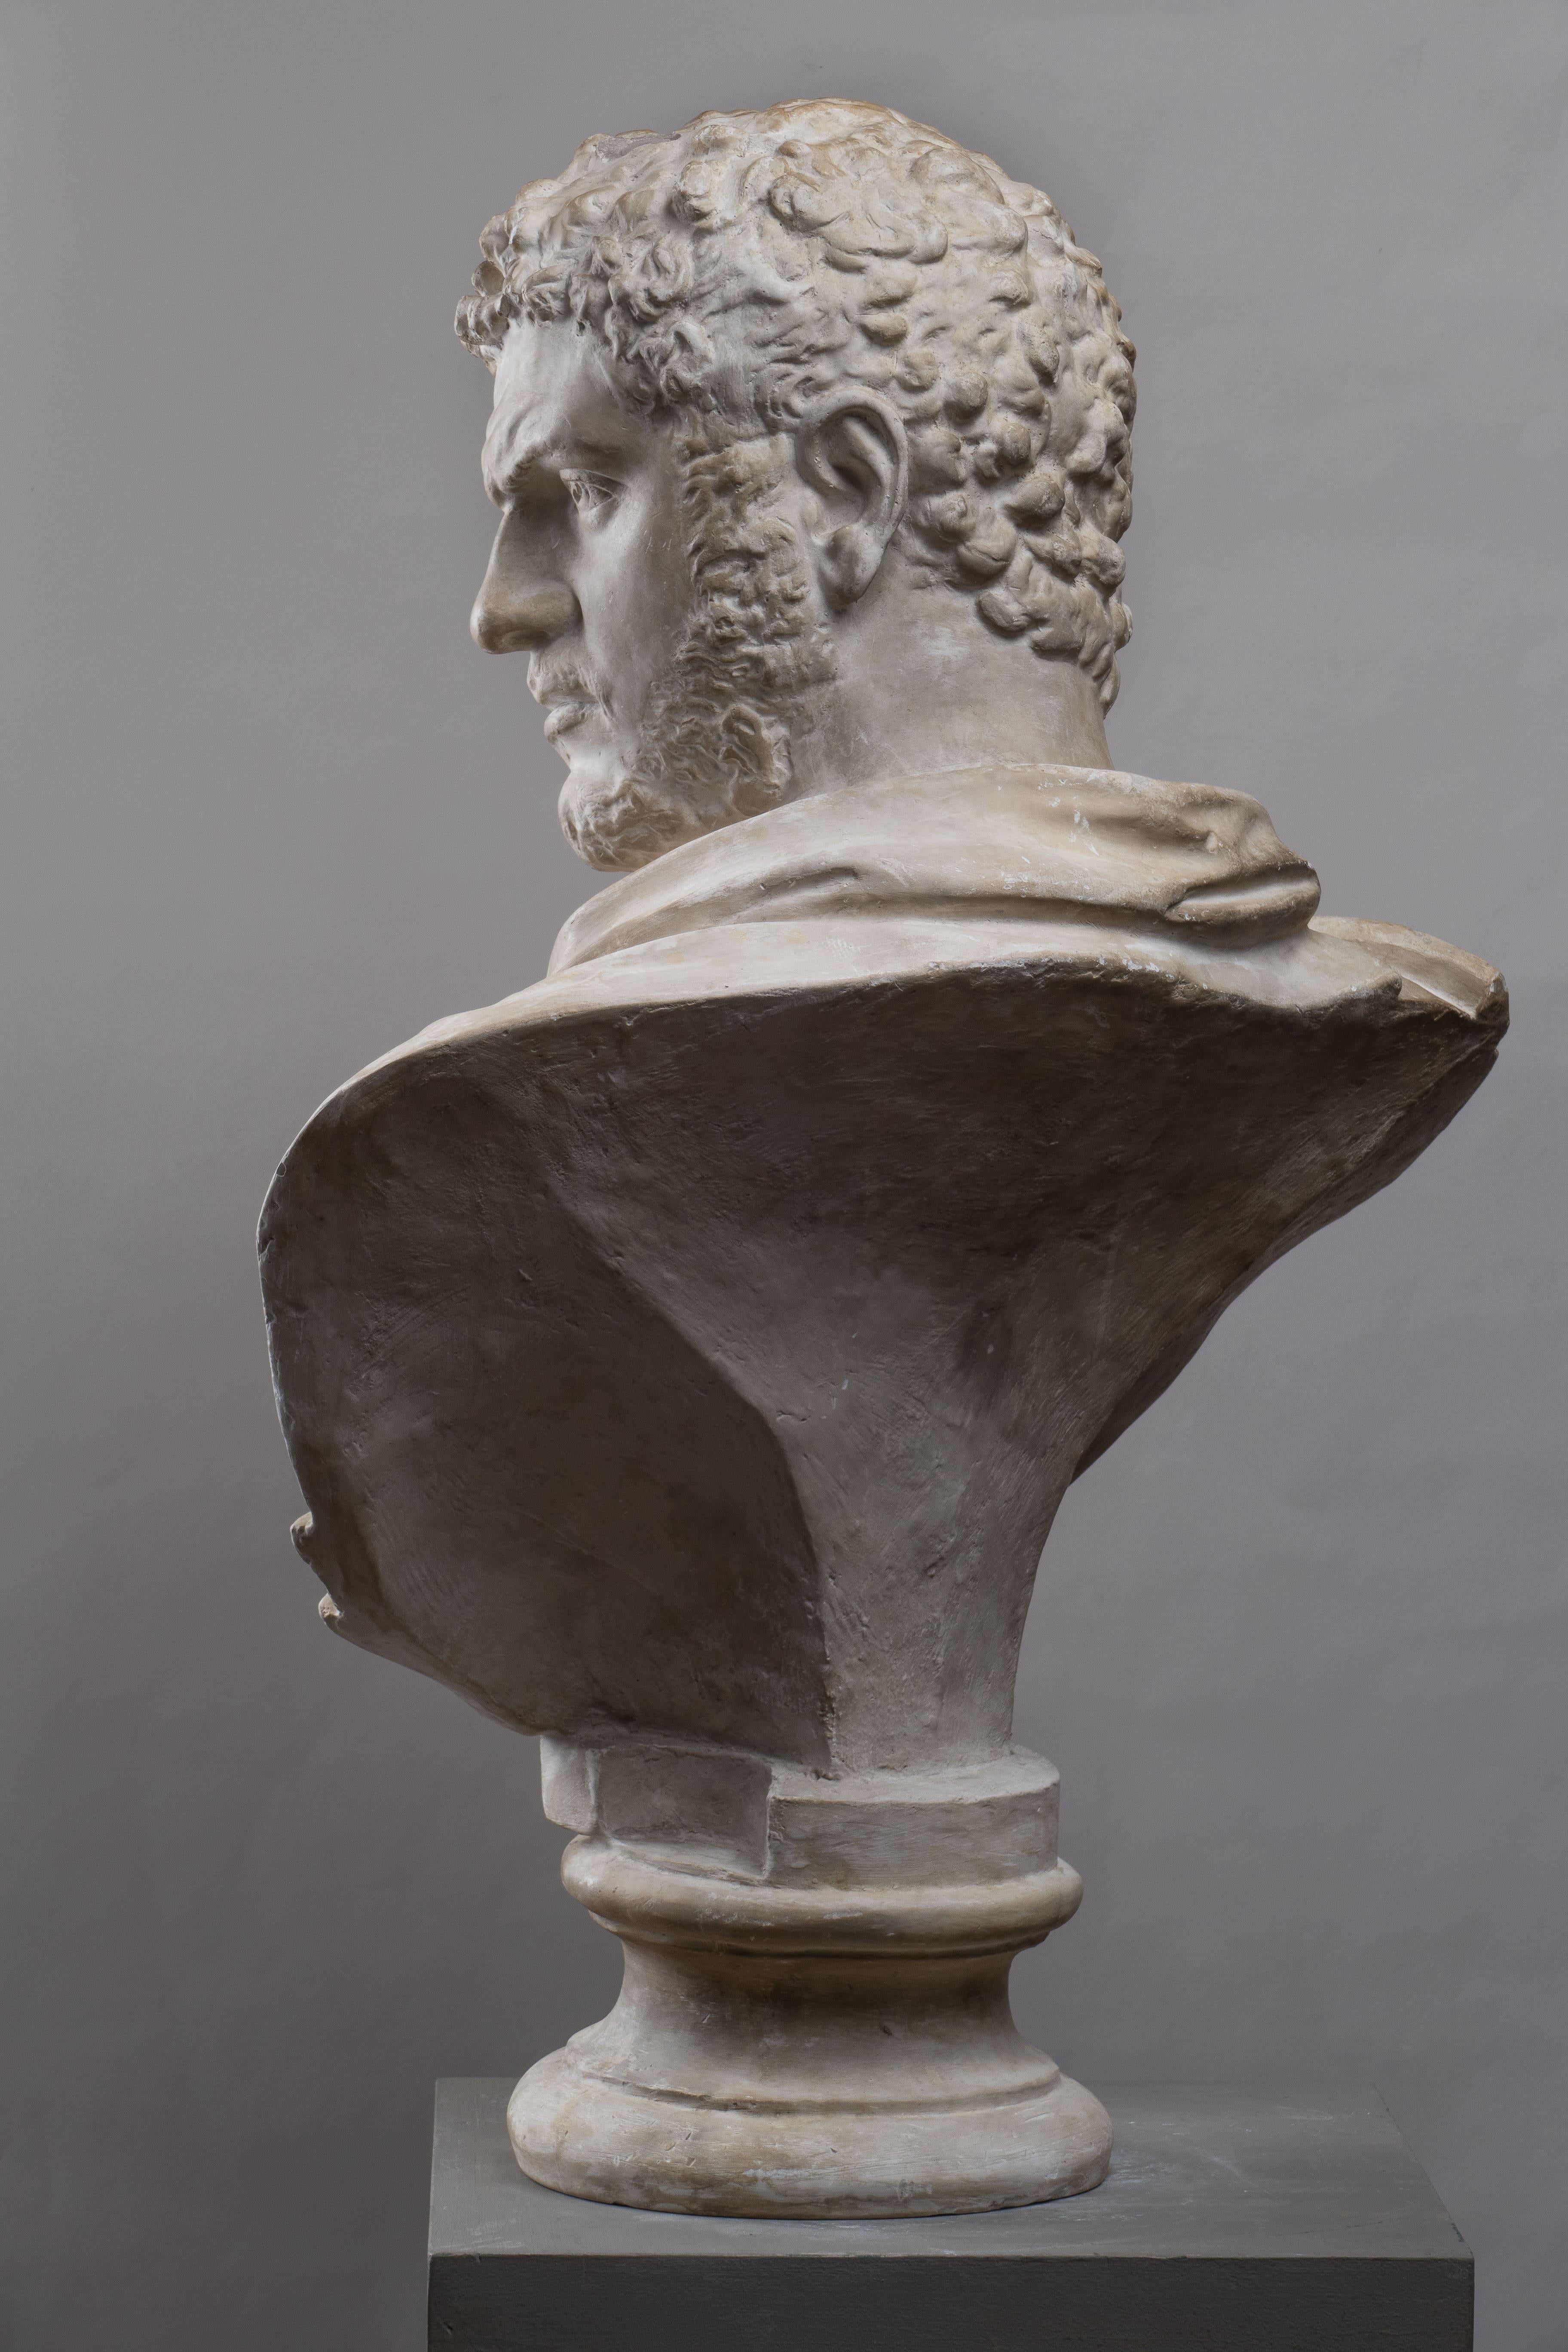 PLASTER PORTRAIT BUST OF CARACALLA, 19th Century
Painted plaster
74 x 55 x 24 cm
29 1/4 x 21 3/4 x 9 1/2 in